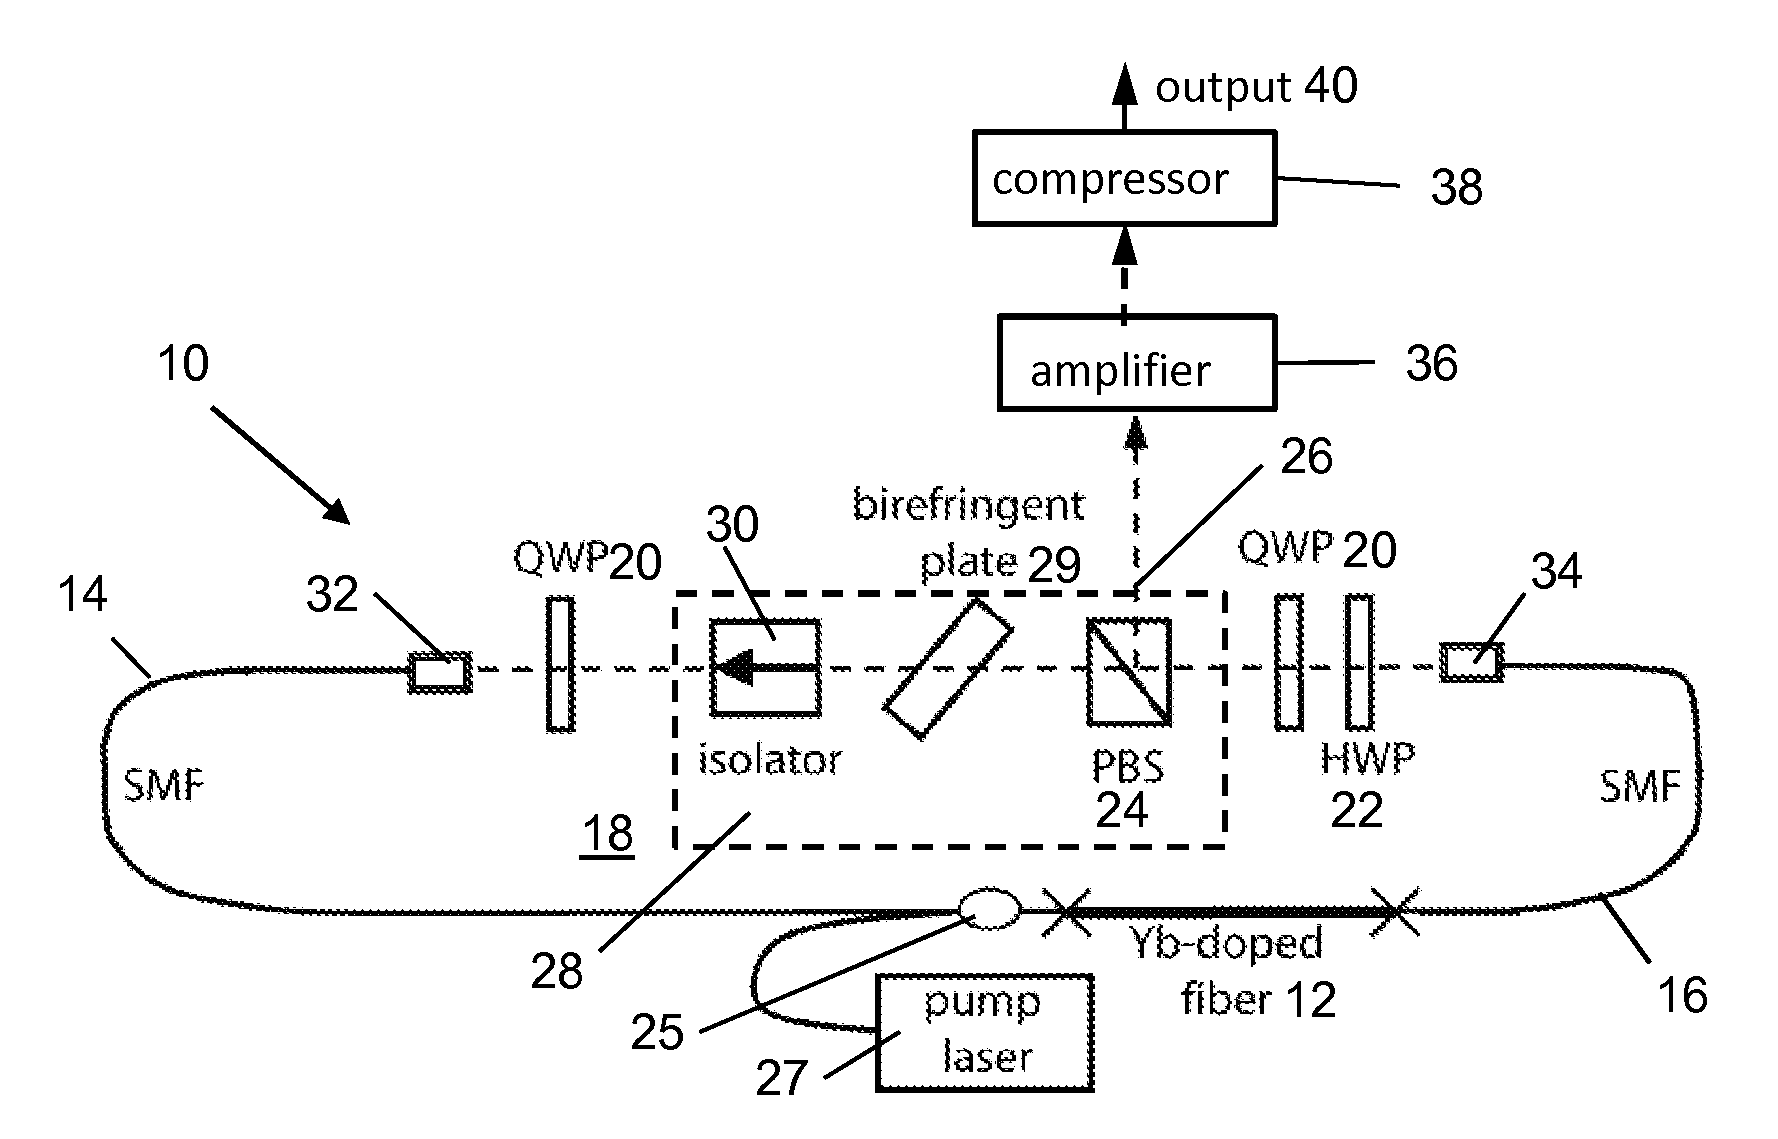 Giant-chirp oscillator for use in fiber pulse amplification system